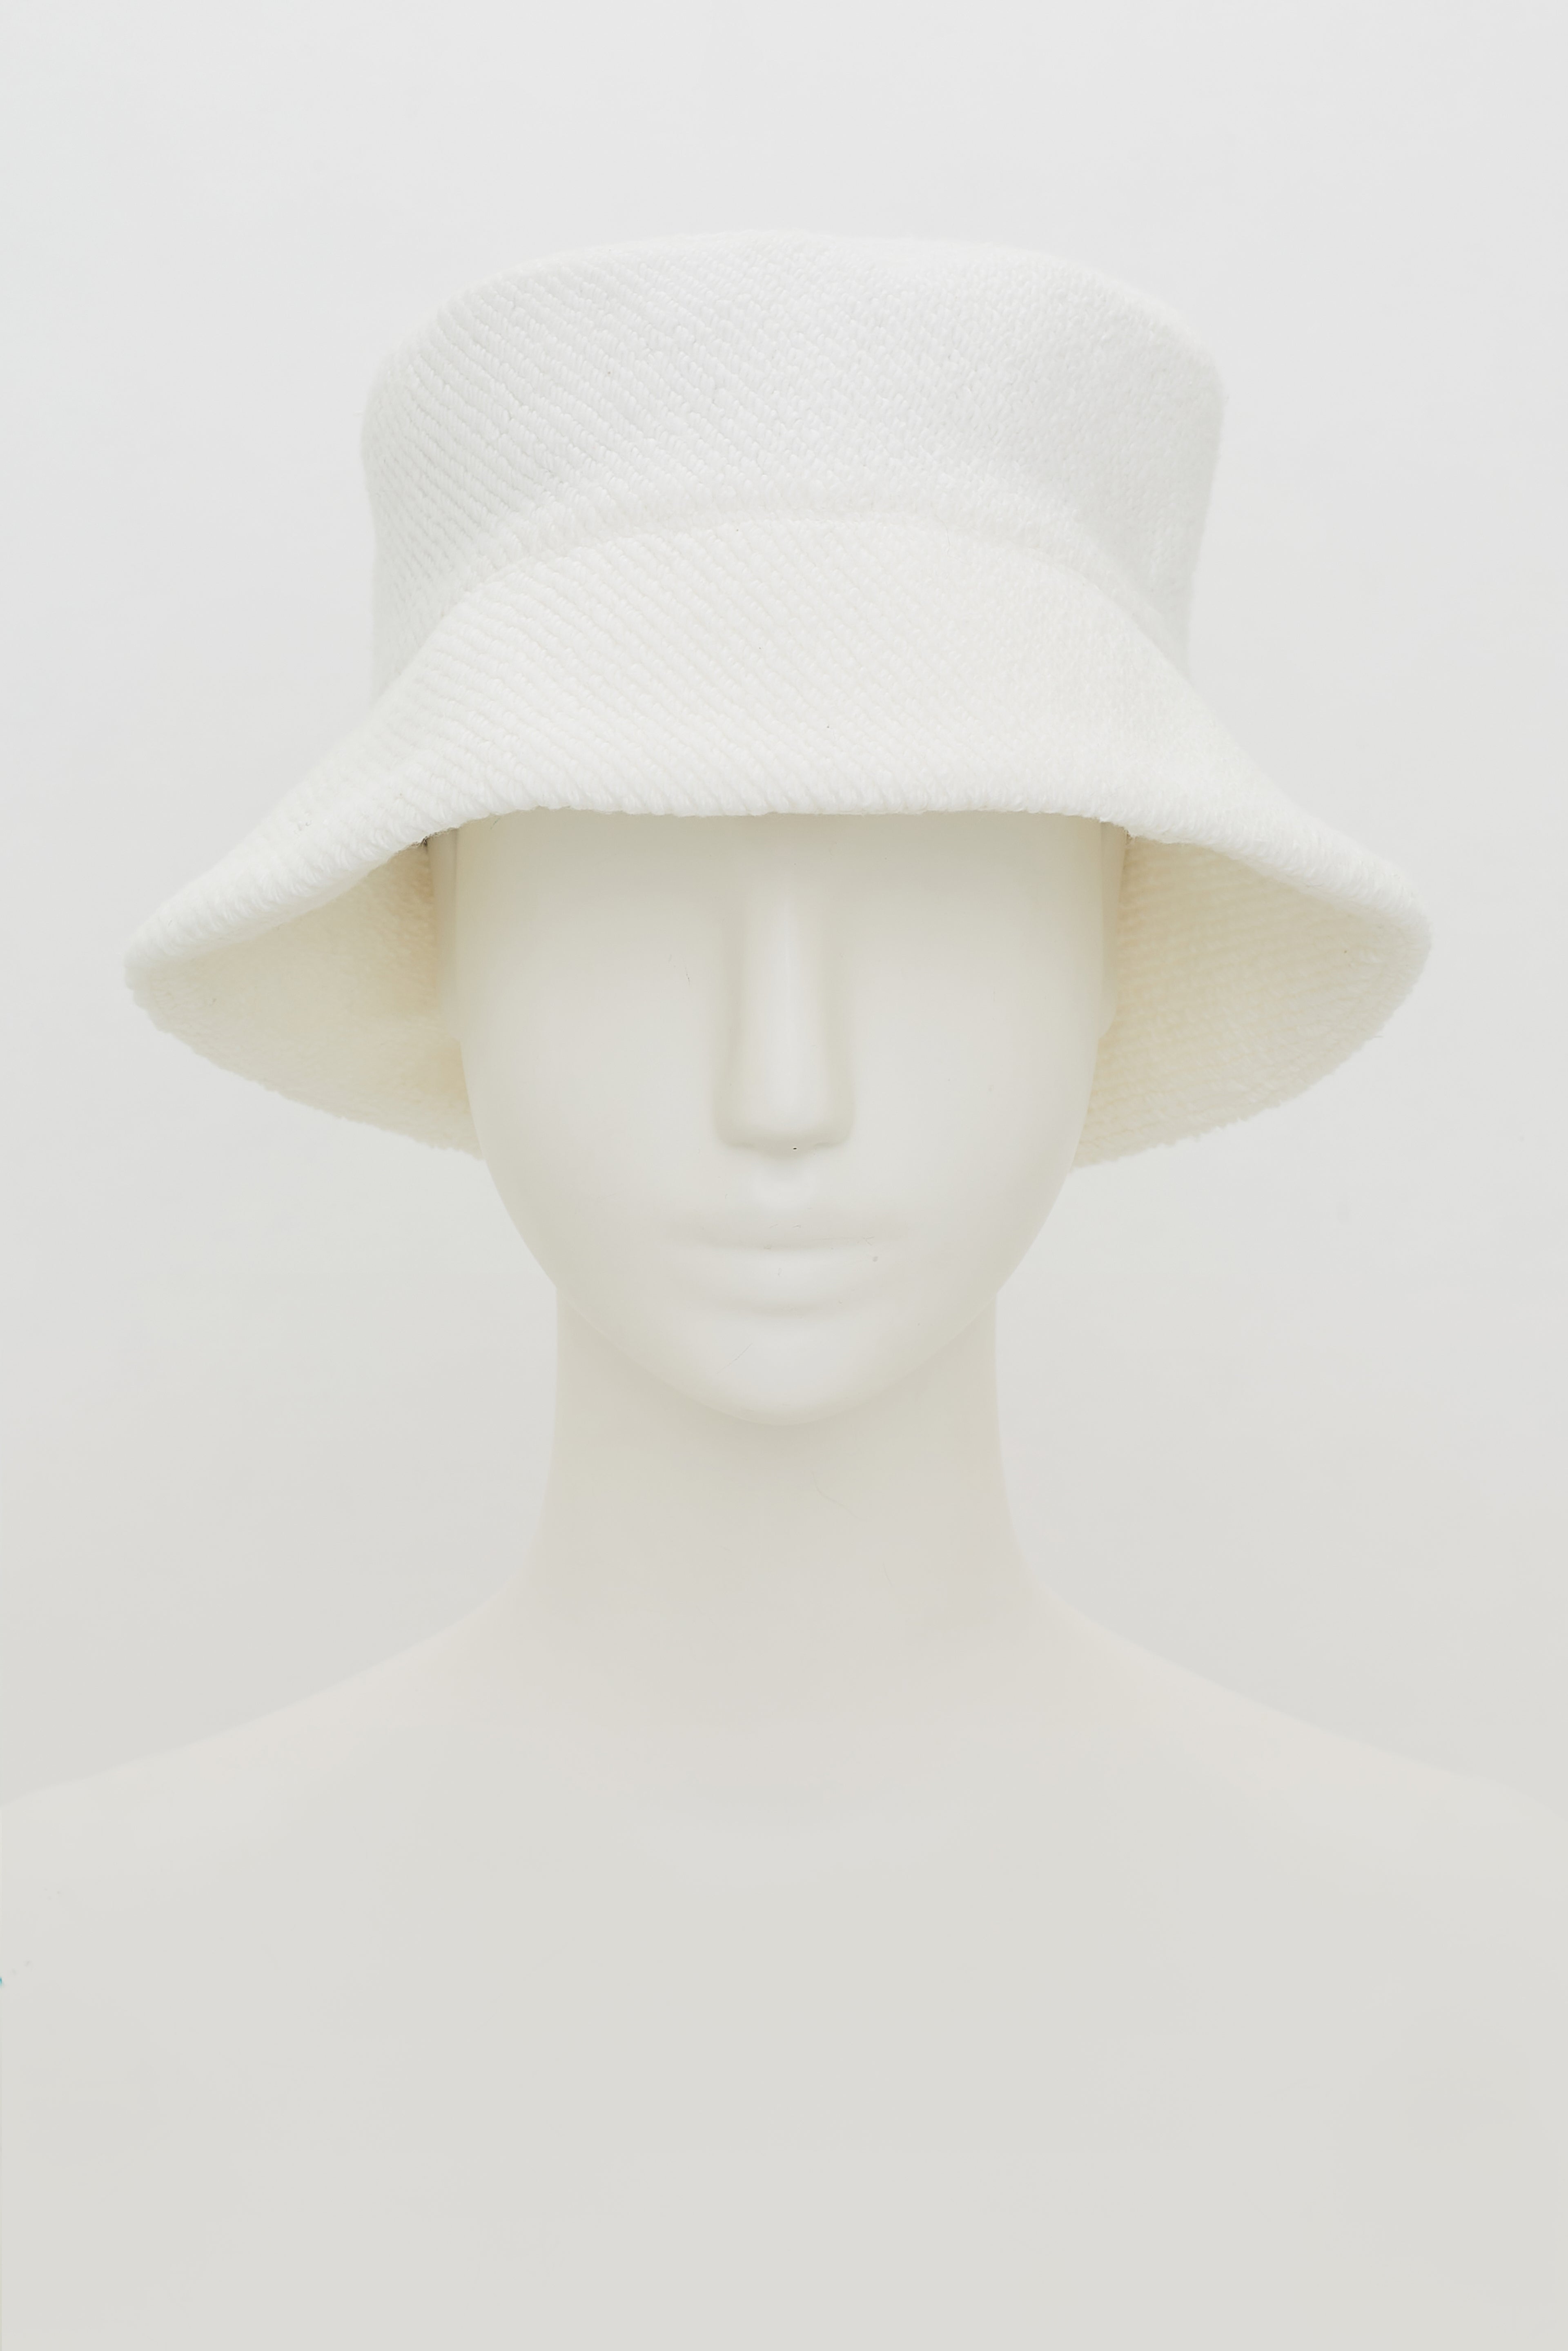 Dorothee-Schumacher-OUTLET-SALE-MODERN-TOWELLING-hat-Accessoires-OS-off-white-ARCHIVE-COLLECTION.jpg